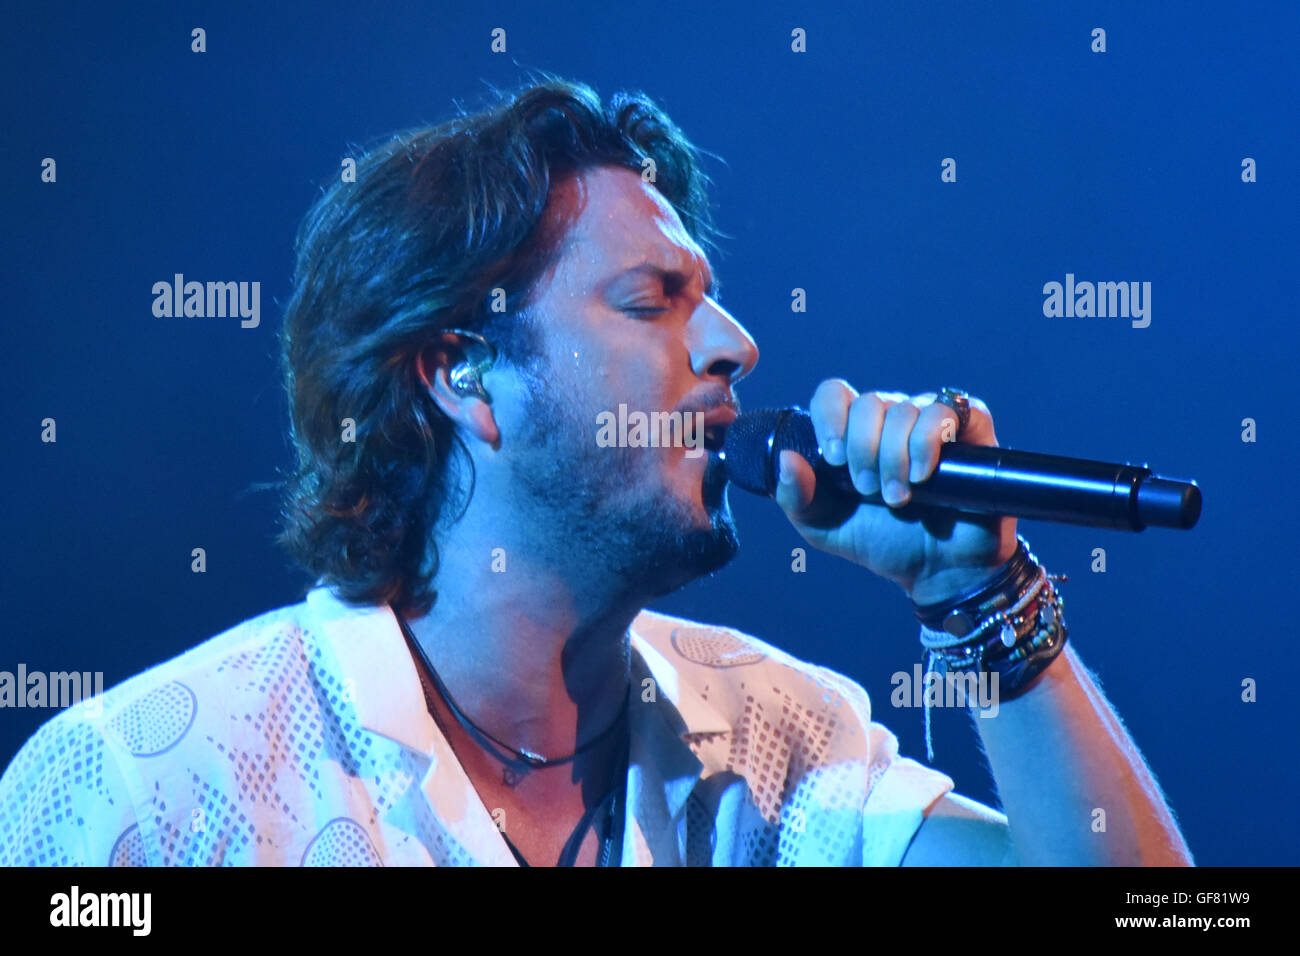 Madrid, Spain. 28th July, 2016. The Spanish singer-songwriter Manuel Carrasco, 35 years-old, pictured during his concert at Teatro Real in Madrid. © Jorge Sanz/Pacific Press/Alamy Live News Stock Photo